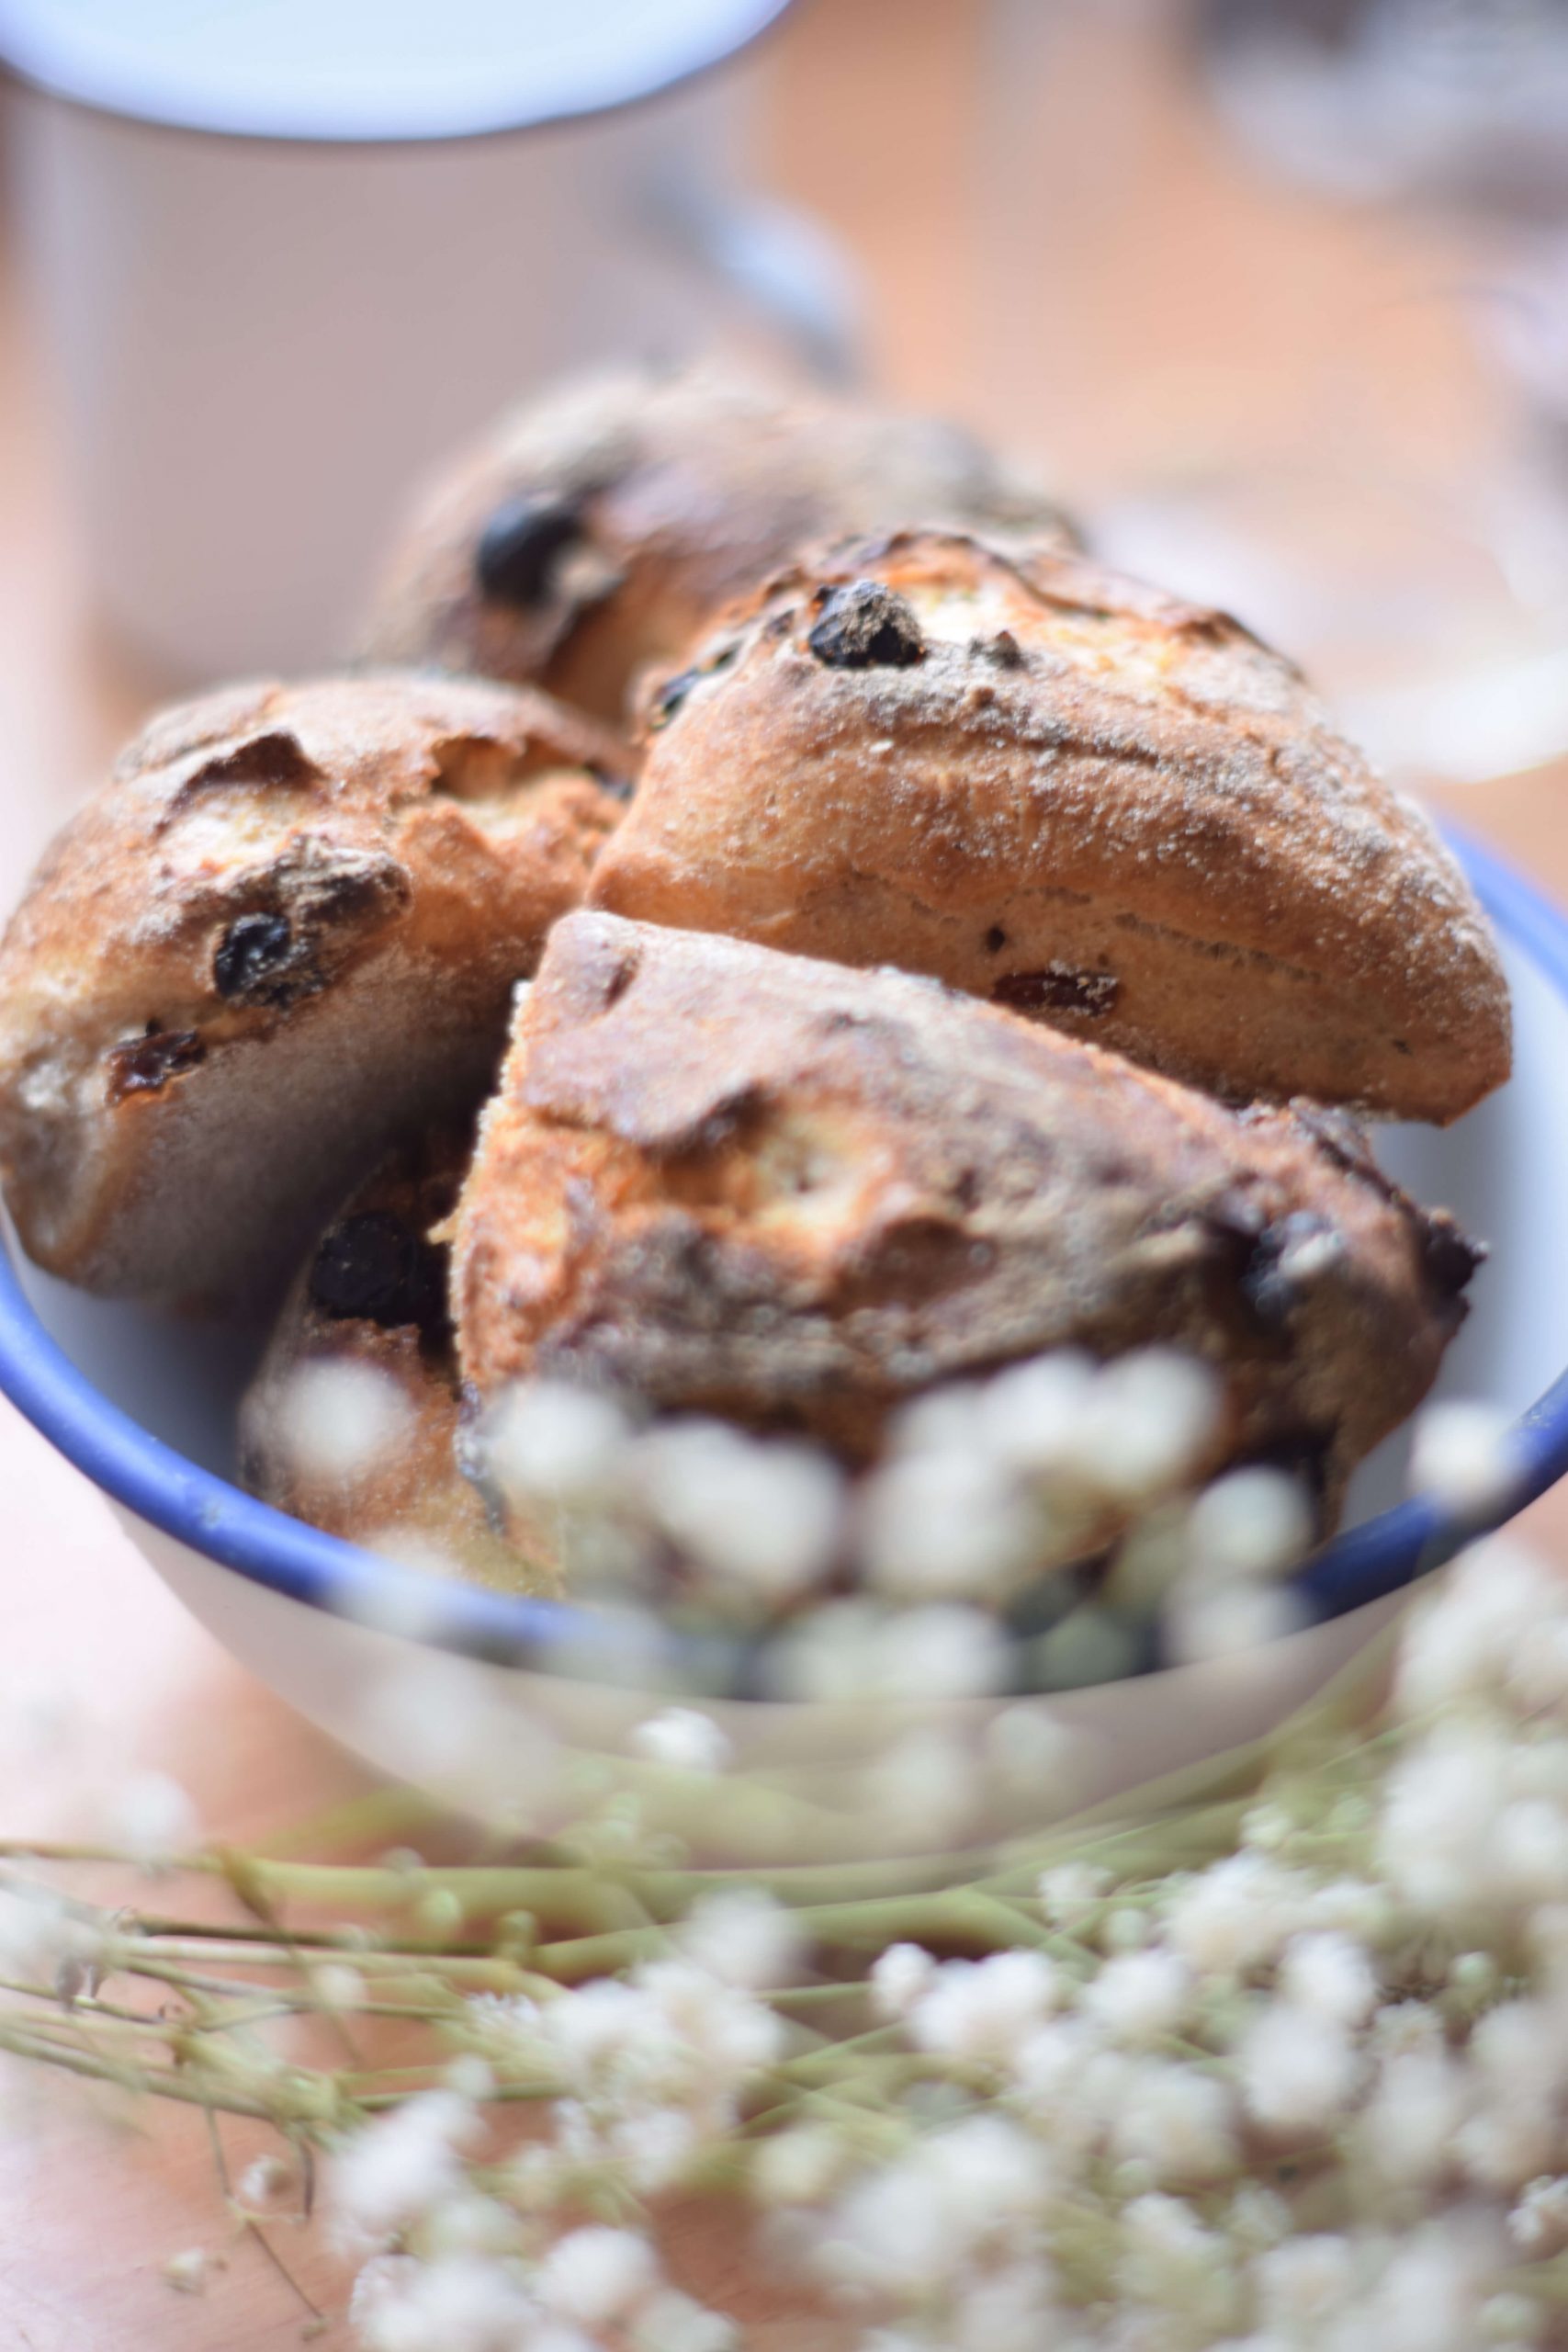 Enamel bowl with blue rim and freshly baked sourdough raisin buns with blurry gypsum herb in the front